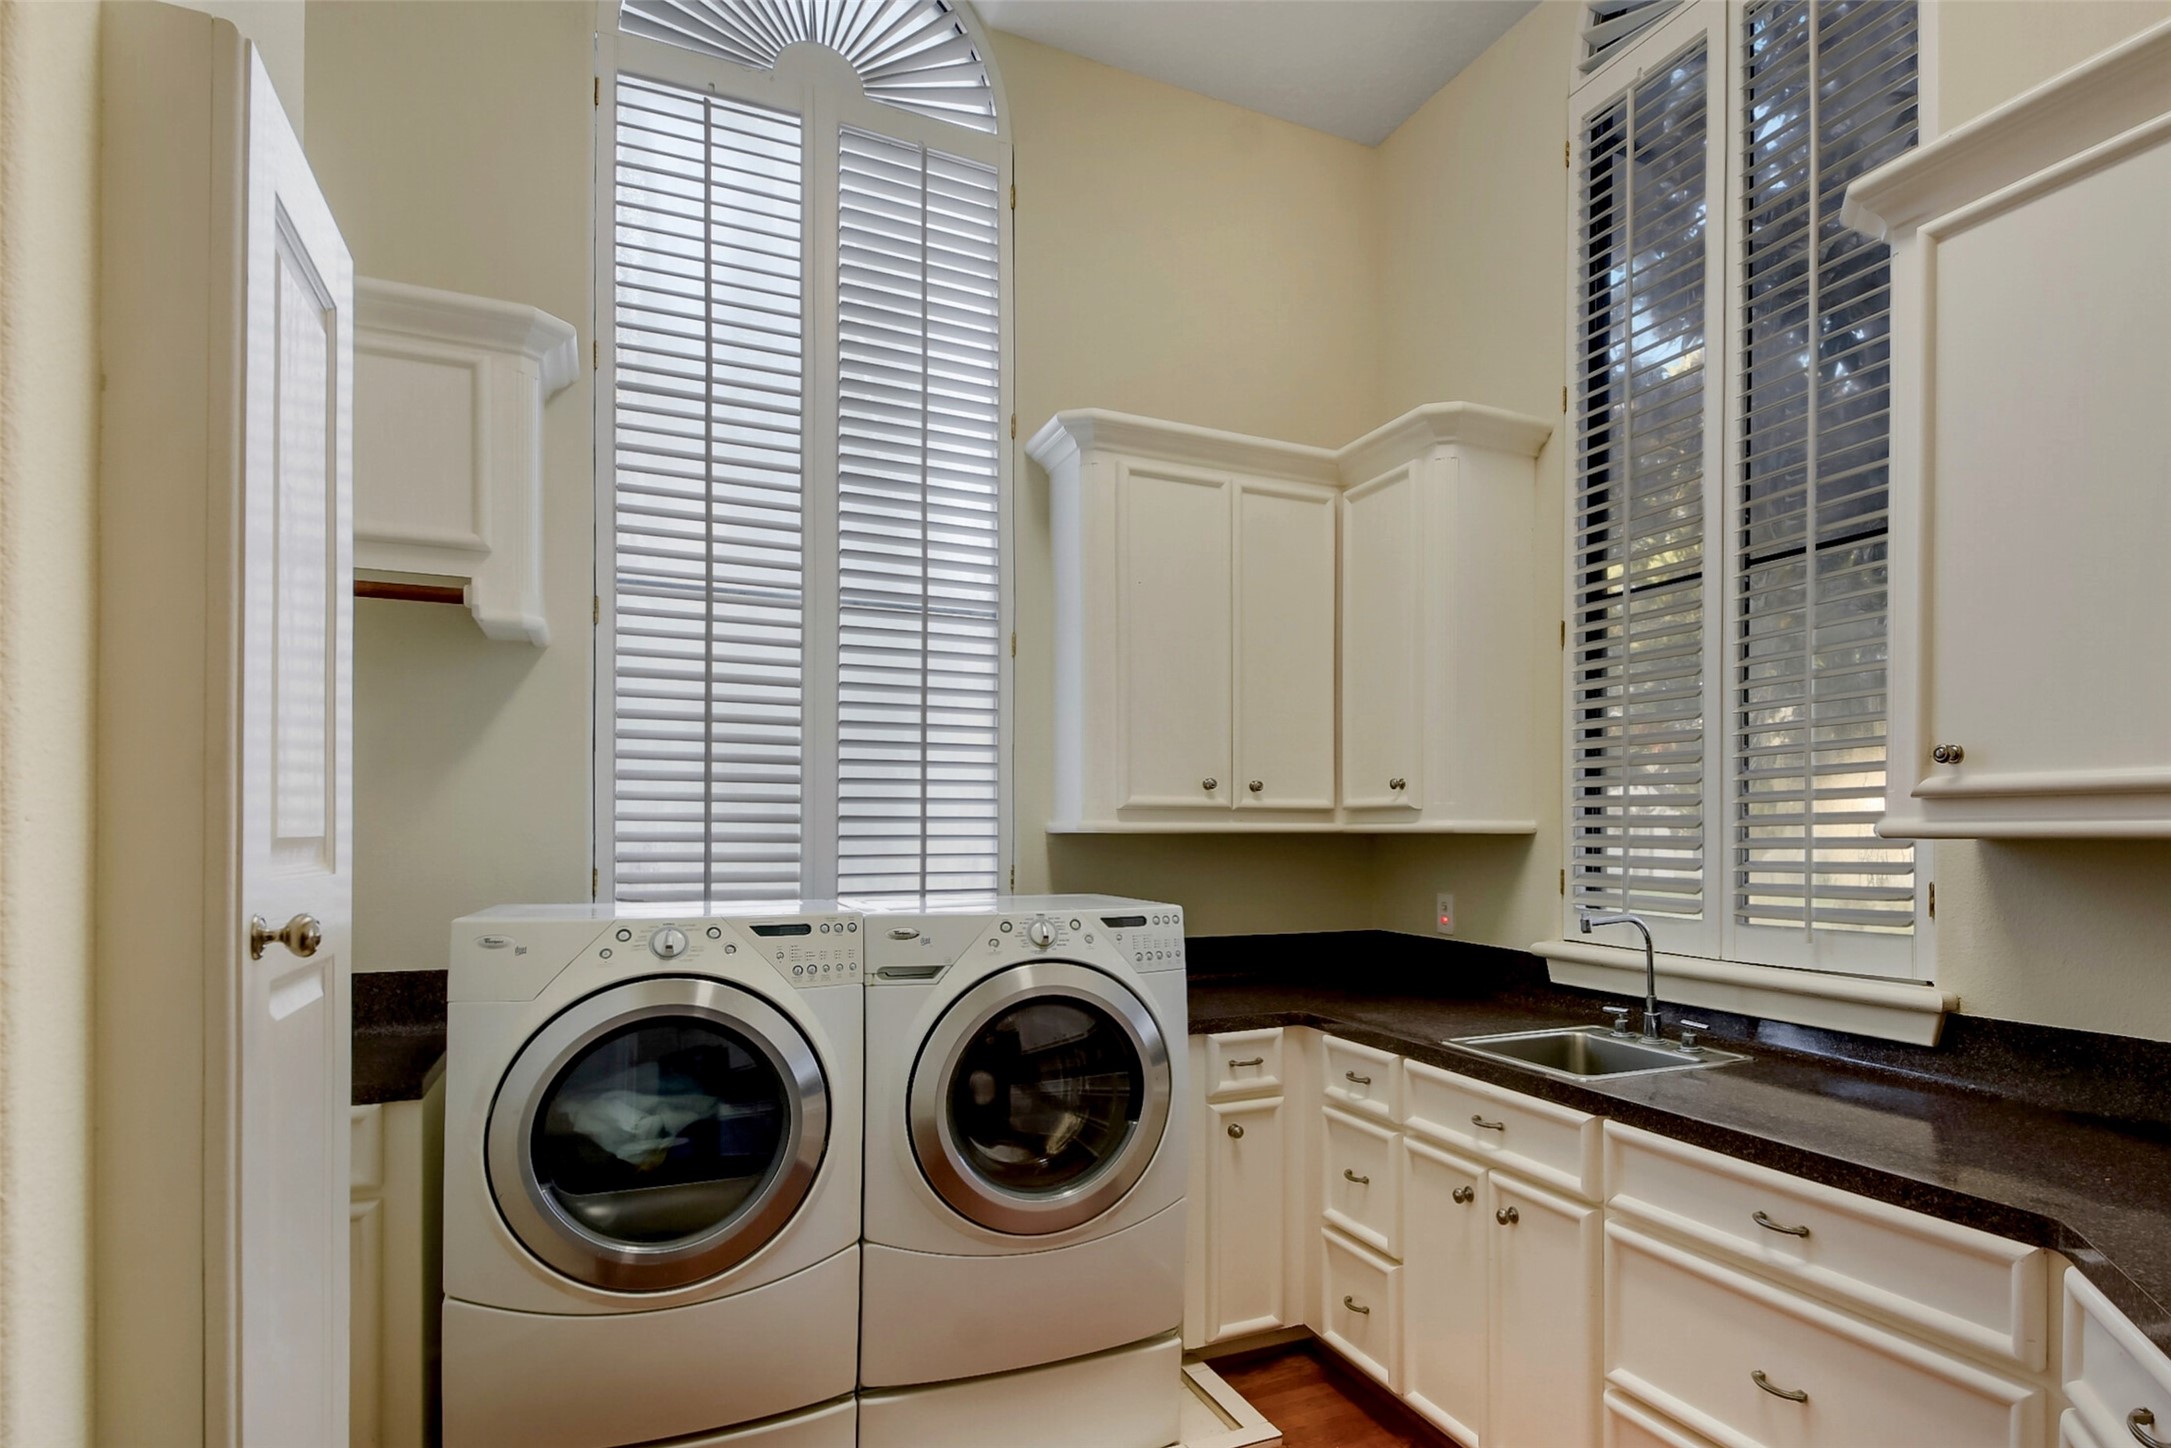 Huge laundry room with extra refrigerator, sink, plenty of counter space, and extra cabinets for storage.